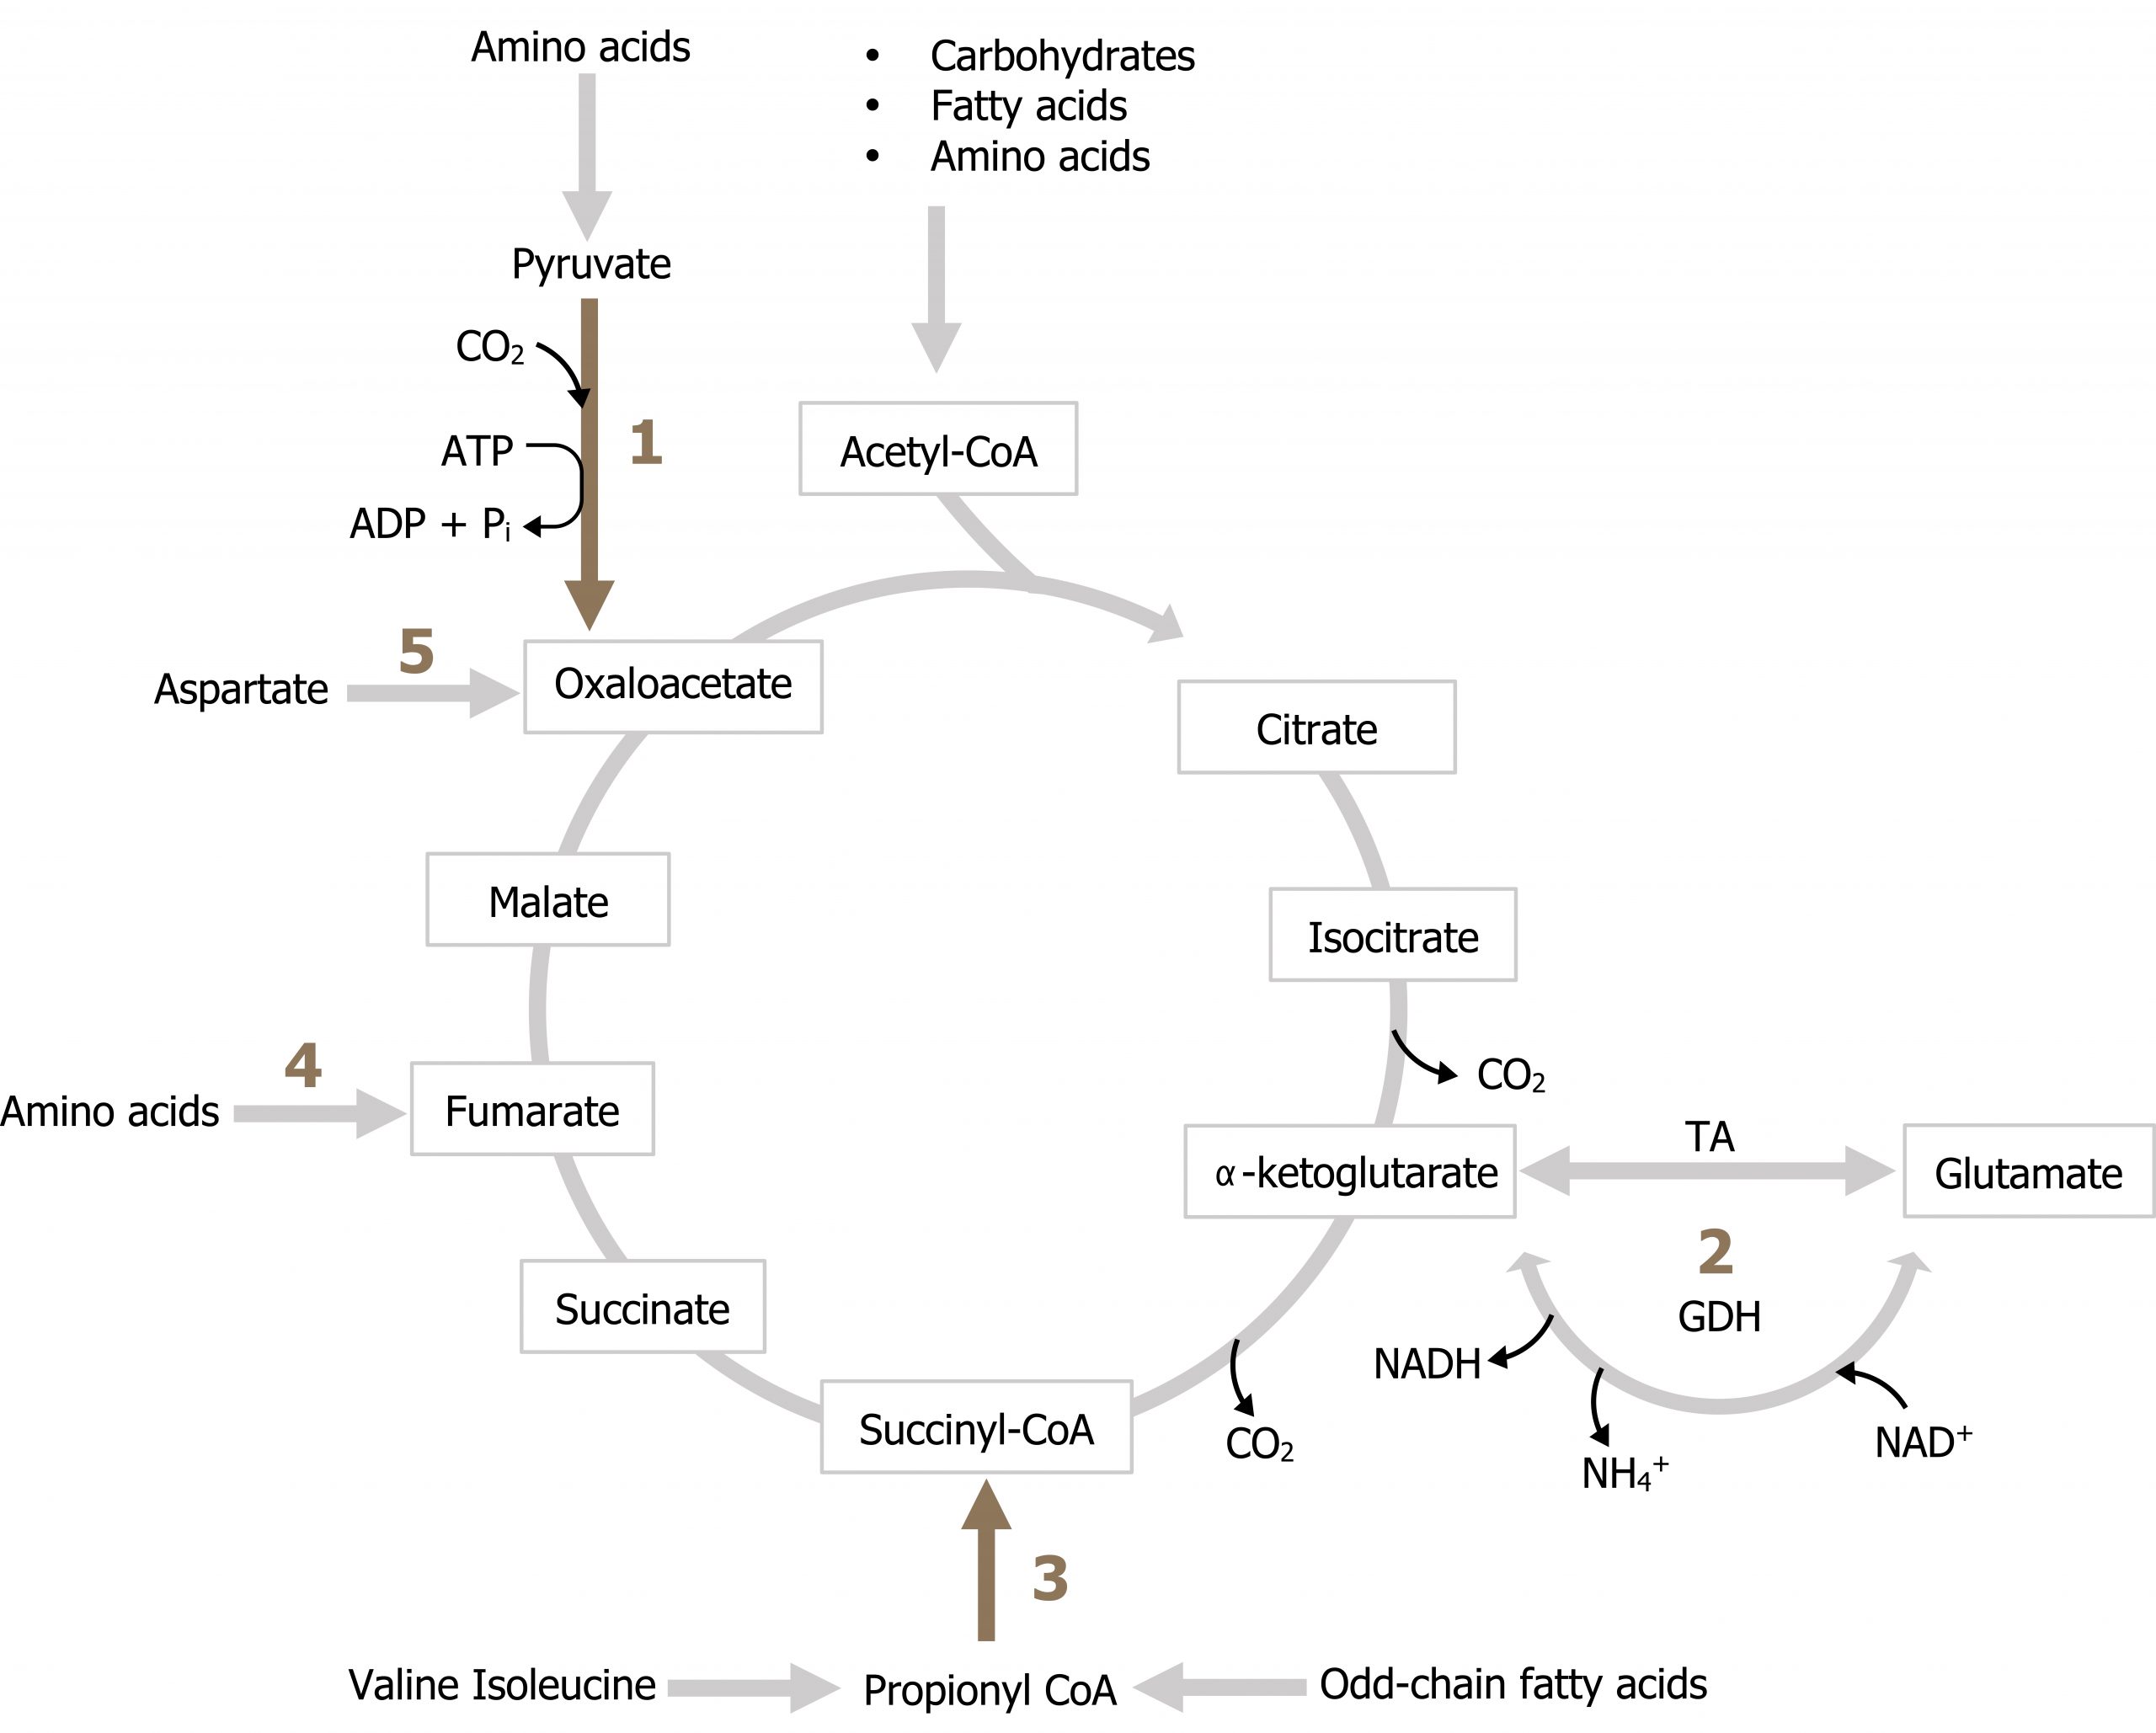 Carbohydrates, fatty acids, amino acids arrow acetyl-CoA into the TCA cycle as described in figure 4.10. 1: Amino acids arrow pyruvate, CO2, ATP arrow oxaloacetate, ADP, Pi. 2: Α-ketoglutarate bidirectional arrow with TA glutamate. Second bidirectional arrow with GDH add NAD+, lose NADH, NH4+. 3: Valine isoleucine and odd chain fatty acids arrows propionyl-coA arrow succinyl-CoA. 4: Amino acids arrow fumarate.